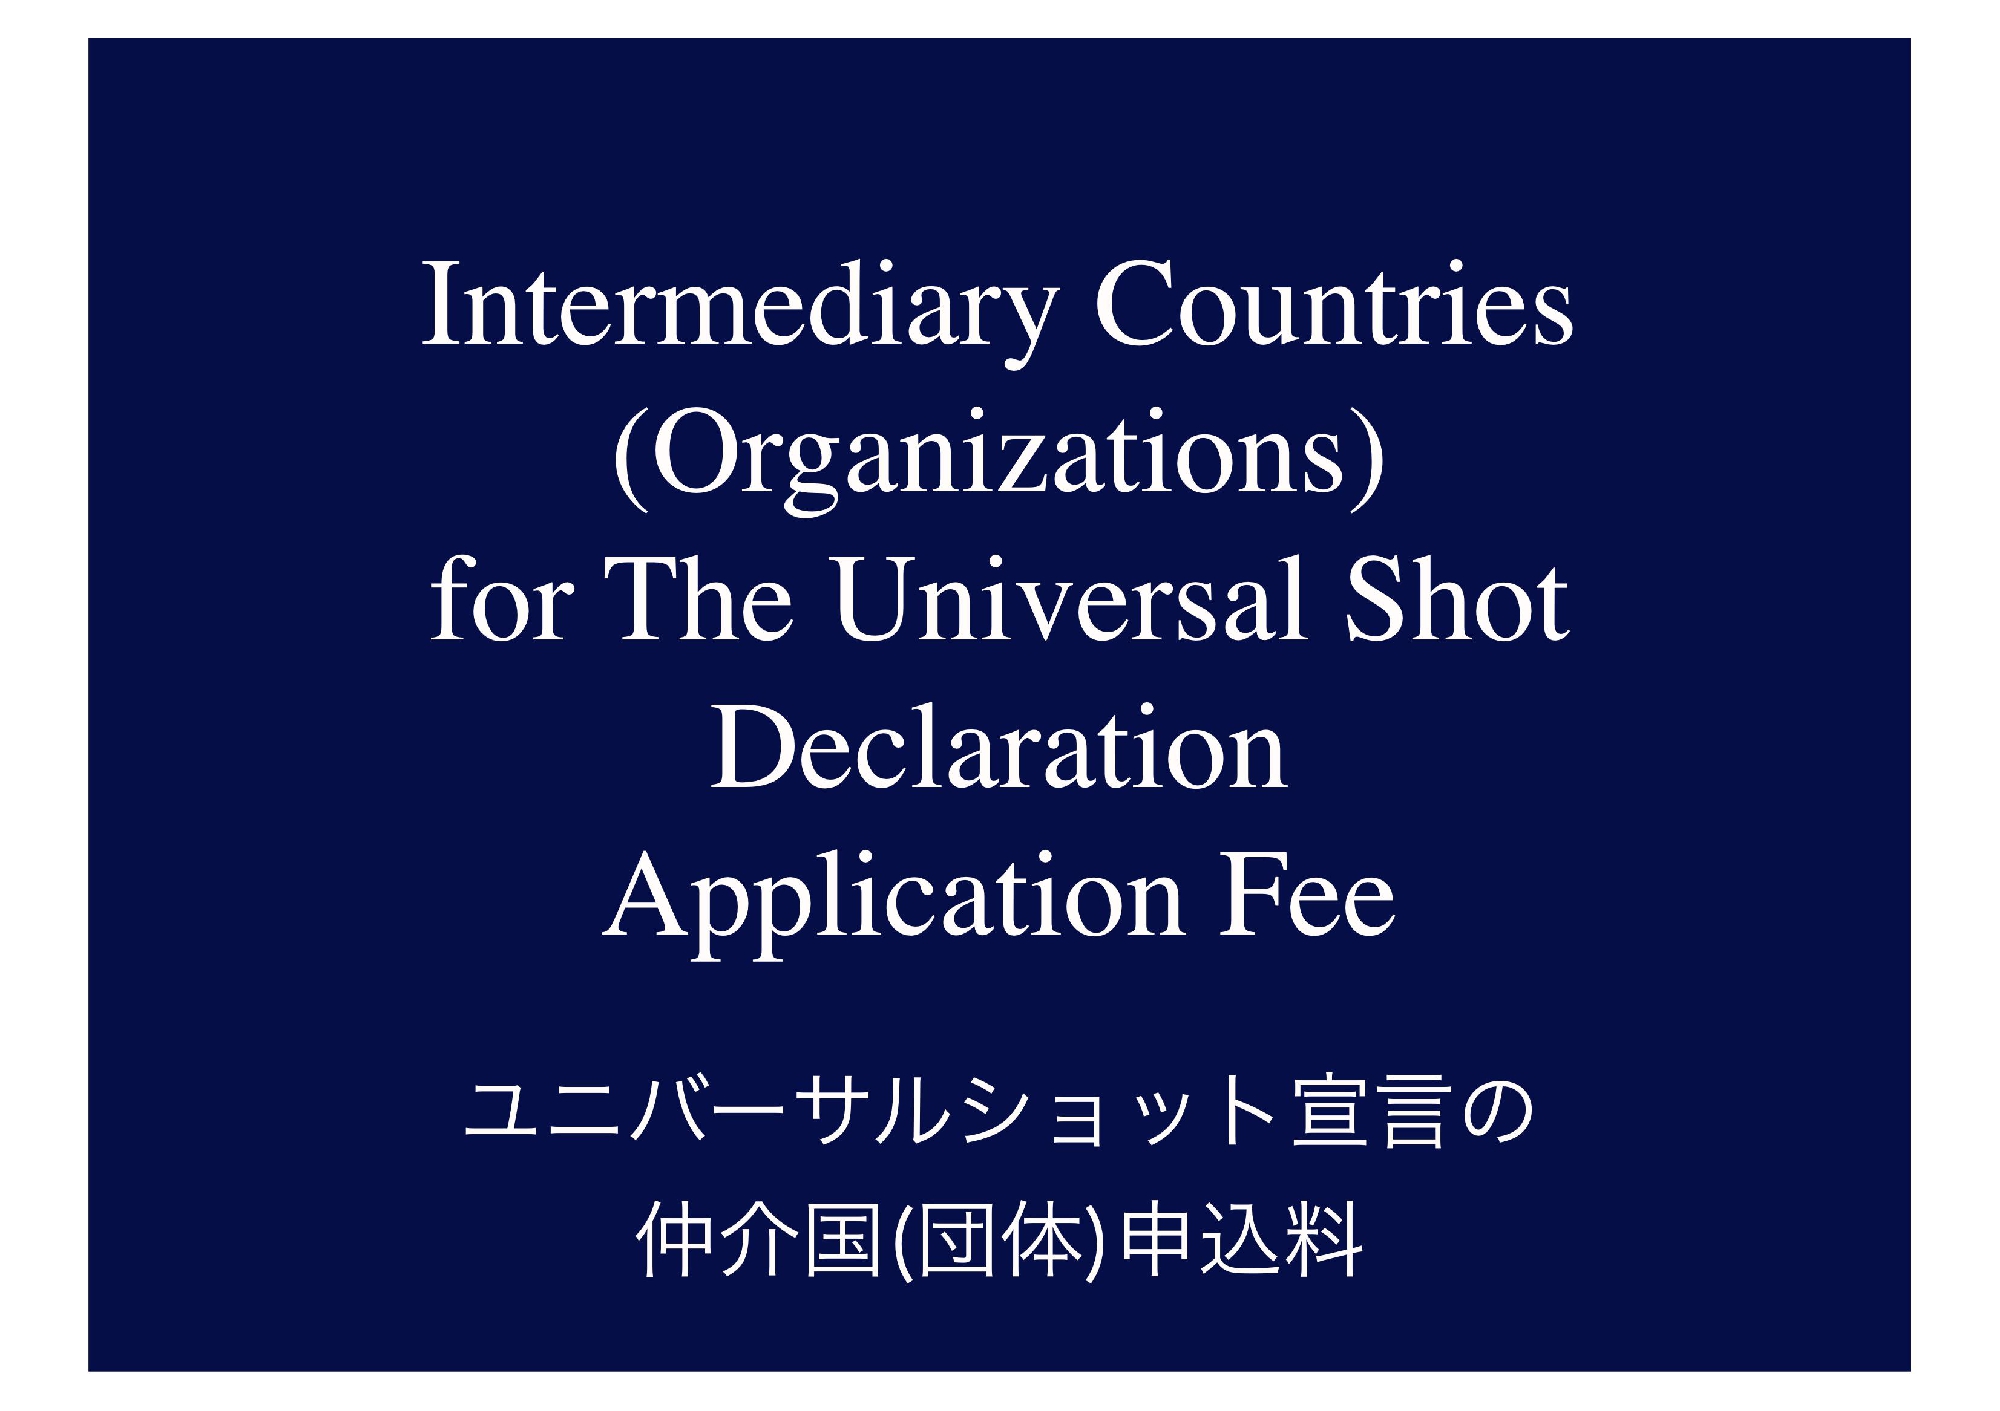 Proposed 1 : For Application and more information ​​​​​​​/ 申し込み, 詳細